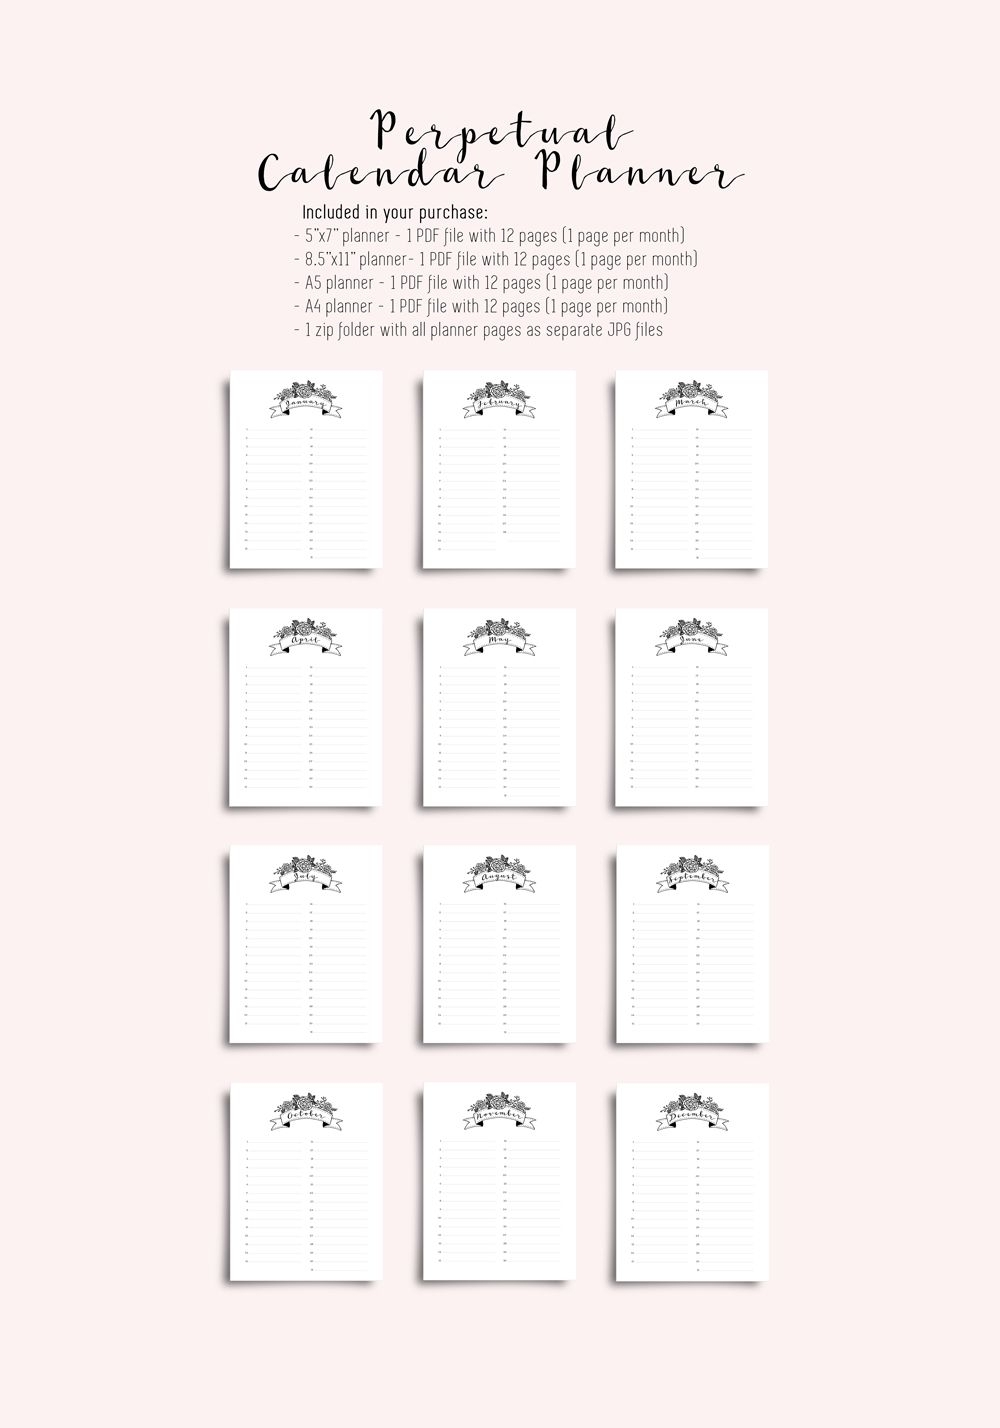 Perpetual Calendar Planner - Printable Calendar Pages. 5X7 with 8.5 X 11 Calendar Pages